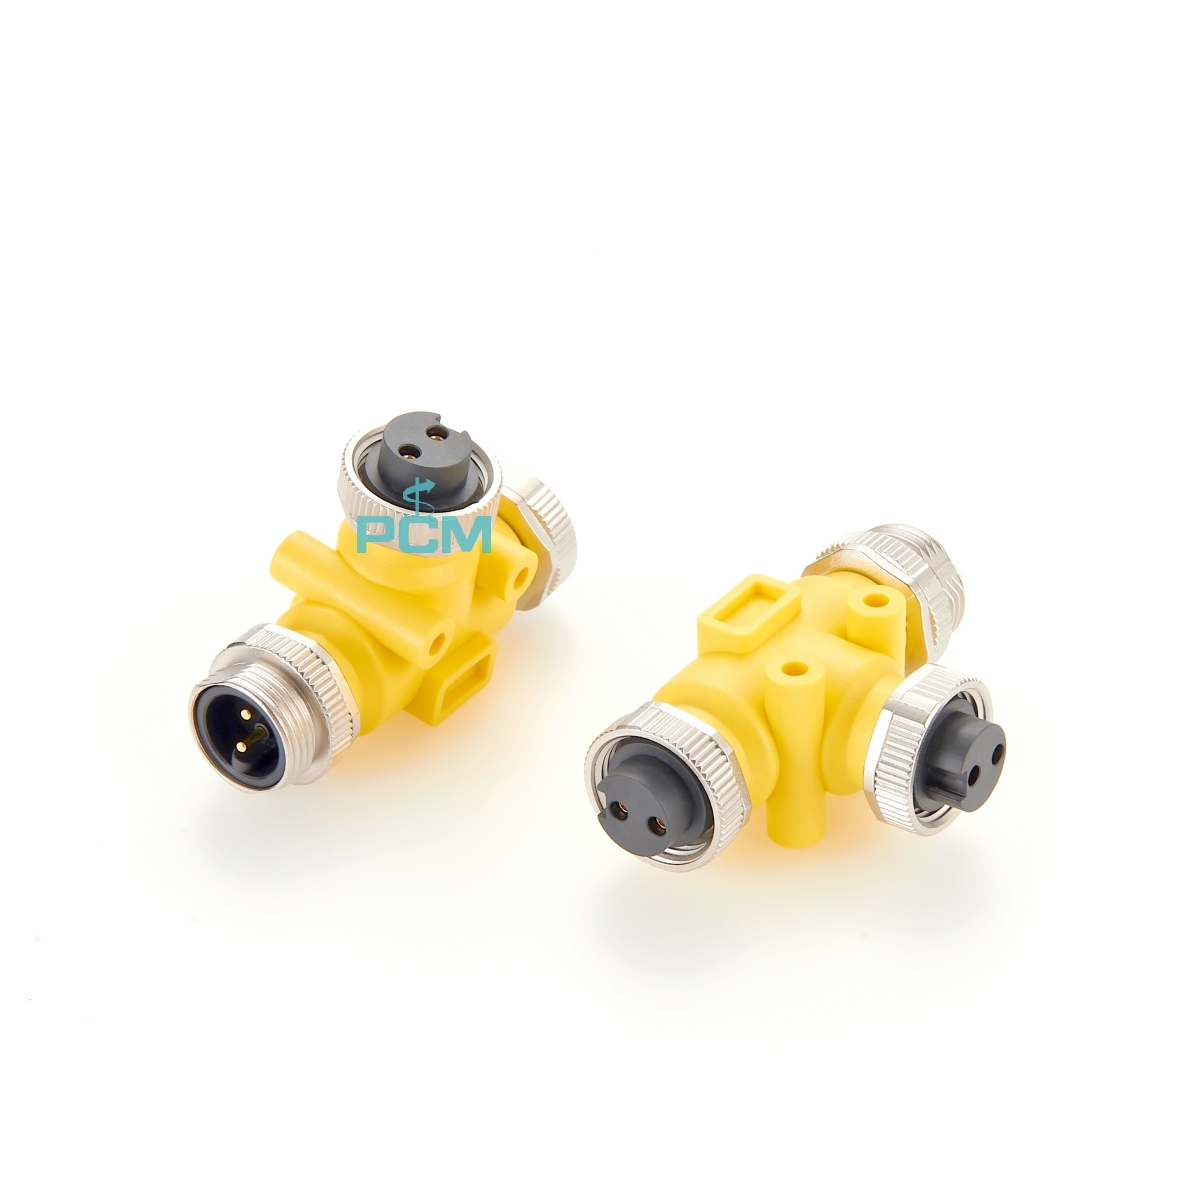 7/8" Circular Connector Male to Female 2 core Splitter 7/8 T-Type Aviation Plug